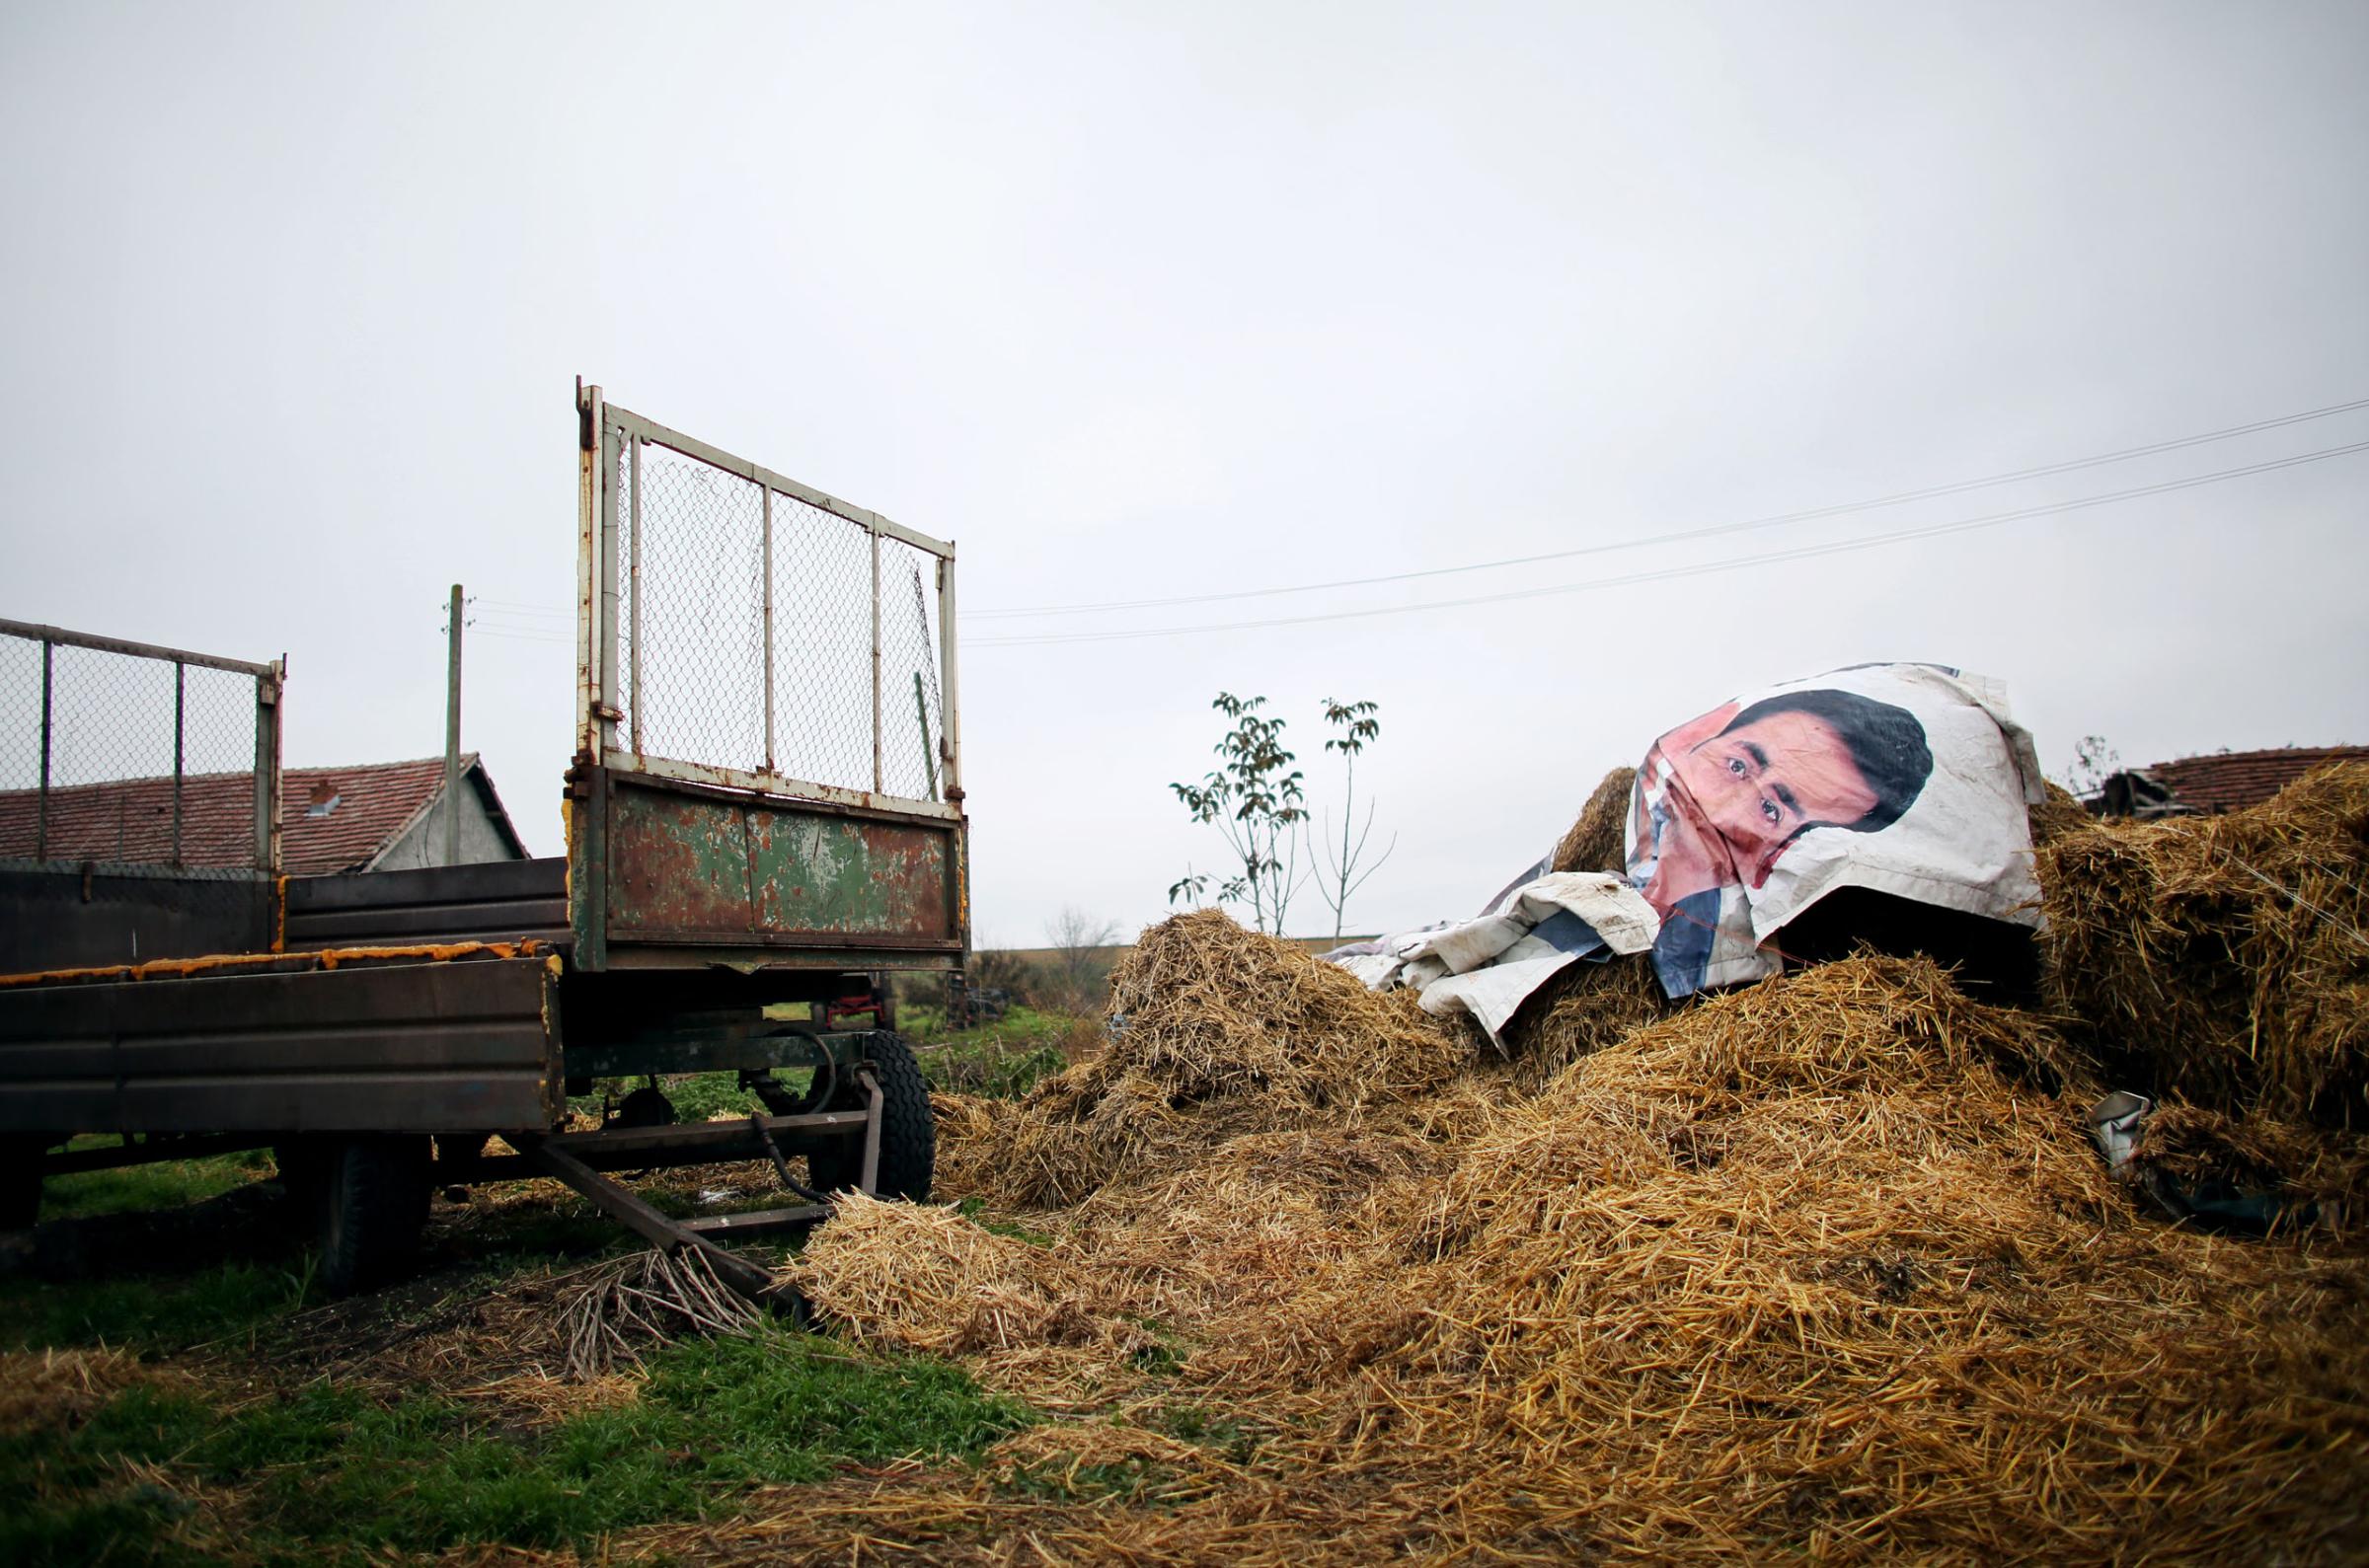 An advertisement is used as covering for a farmer's stacks of hay, in Belene, on November 10th, 2014.This photo is from a project that aims to gauge the state and effect of democracy in the former Soviet satellite nation Bulgaria, two and a half decades after the fall of the Berlin Wall. The story of democracy in Bulgaria at age 25 is a cautionary tale about transplanting one-size-fits-all Western values to a nation still undergoing social and economic upheaval. Bulgaria is still one of the poorest, most corrupt nations in the European Union, its post-1989 hopes wilted by political instability, high crime rates and skyrocketing inflation. While Bulgarians can now freely vote and protest without much threat to their freedom, their new oppressor is corruption - which is at a 15 year high, across political and civil sectors alike. The ennui is so casually etched on the passerby's face that it becomes routine - one that fits in sadly well against a startling backdrop of rotting architecture, joblessness, and a vast population decline. Despite what democracy has changed in Bulgaria, the daily struggles of its populace remain largely untouched, trapped in a post-communist time capsule.This project was supported by a grant from The Pulitzer Center on Crisis Reporting. Photo by: Yana PaskovaCopyright © Yana Paskova 2014